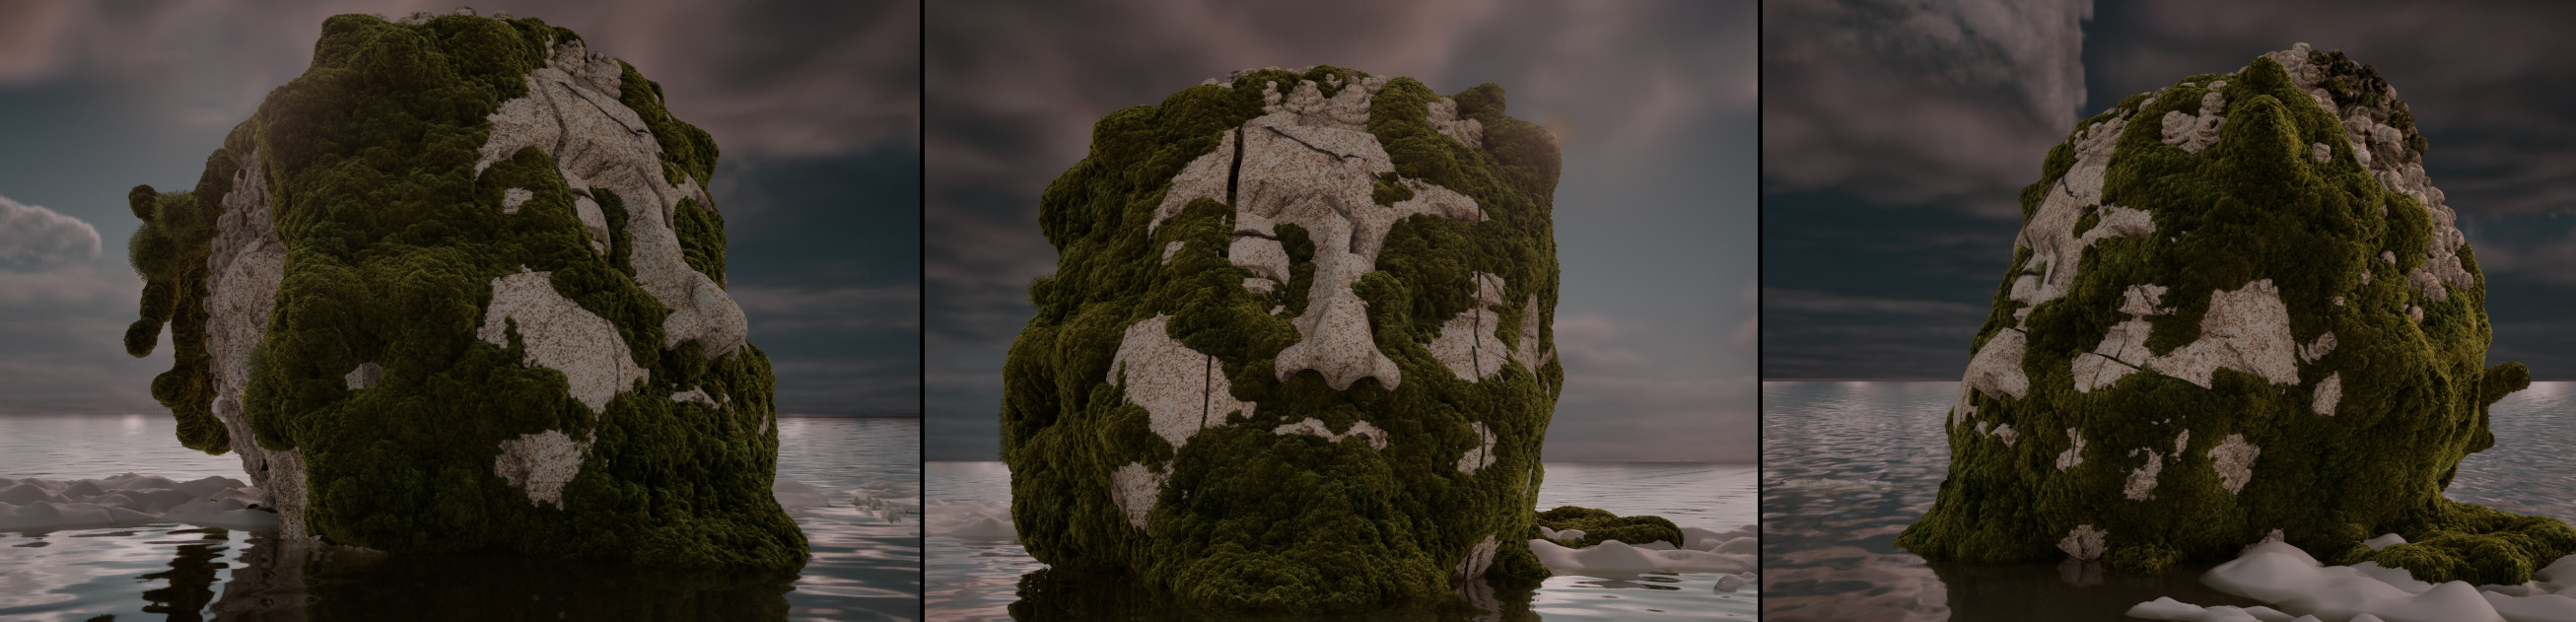 Moss generated on the stone head